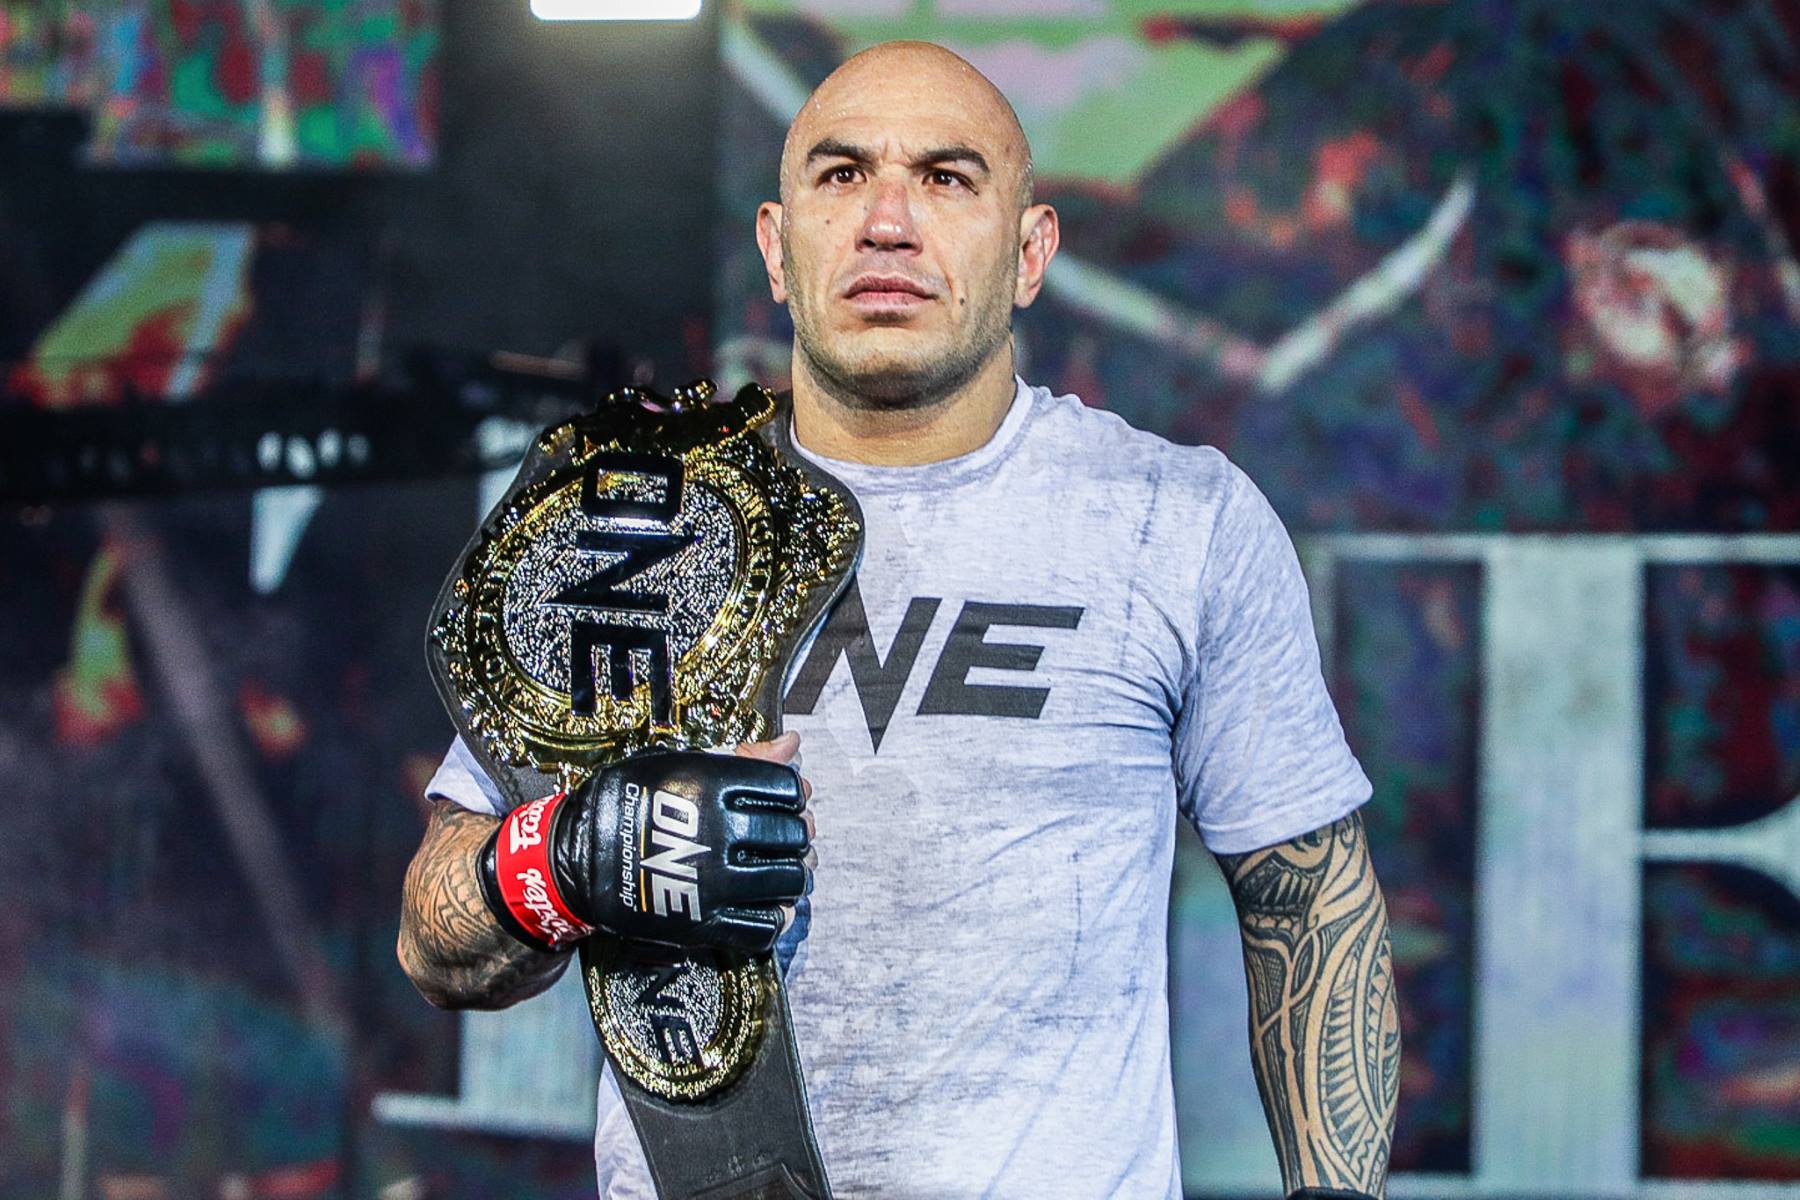 12-mind-blowing-facts-about-brandon-vera